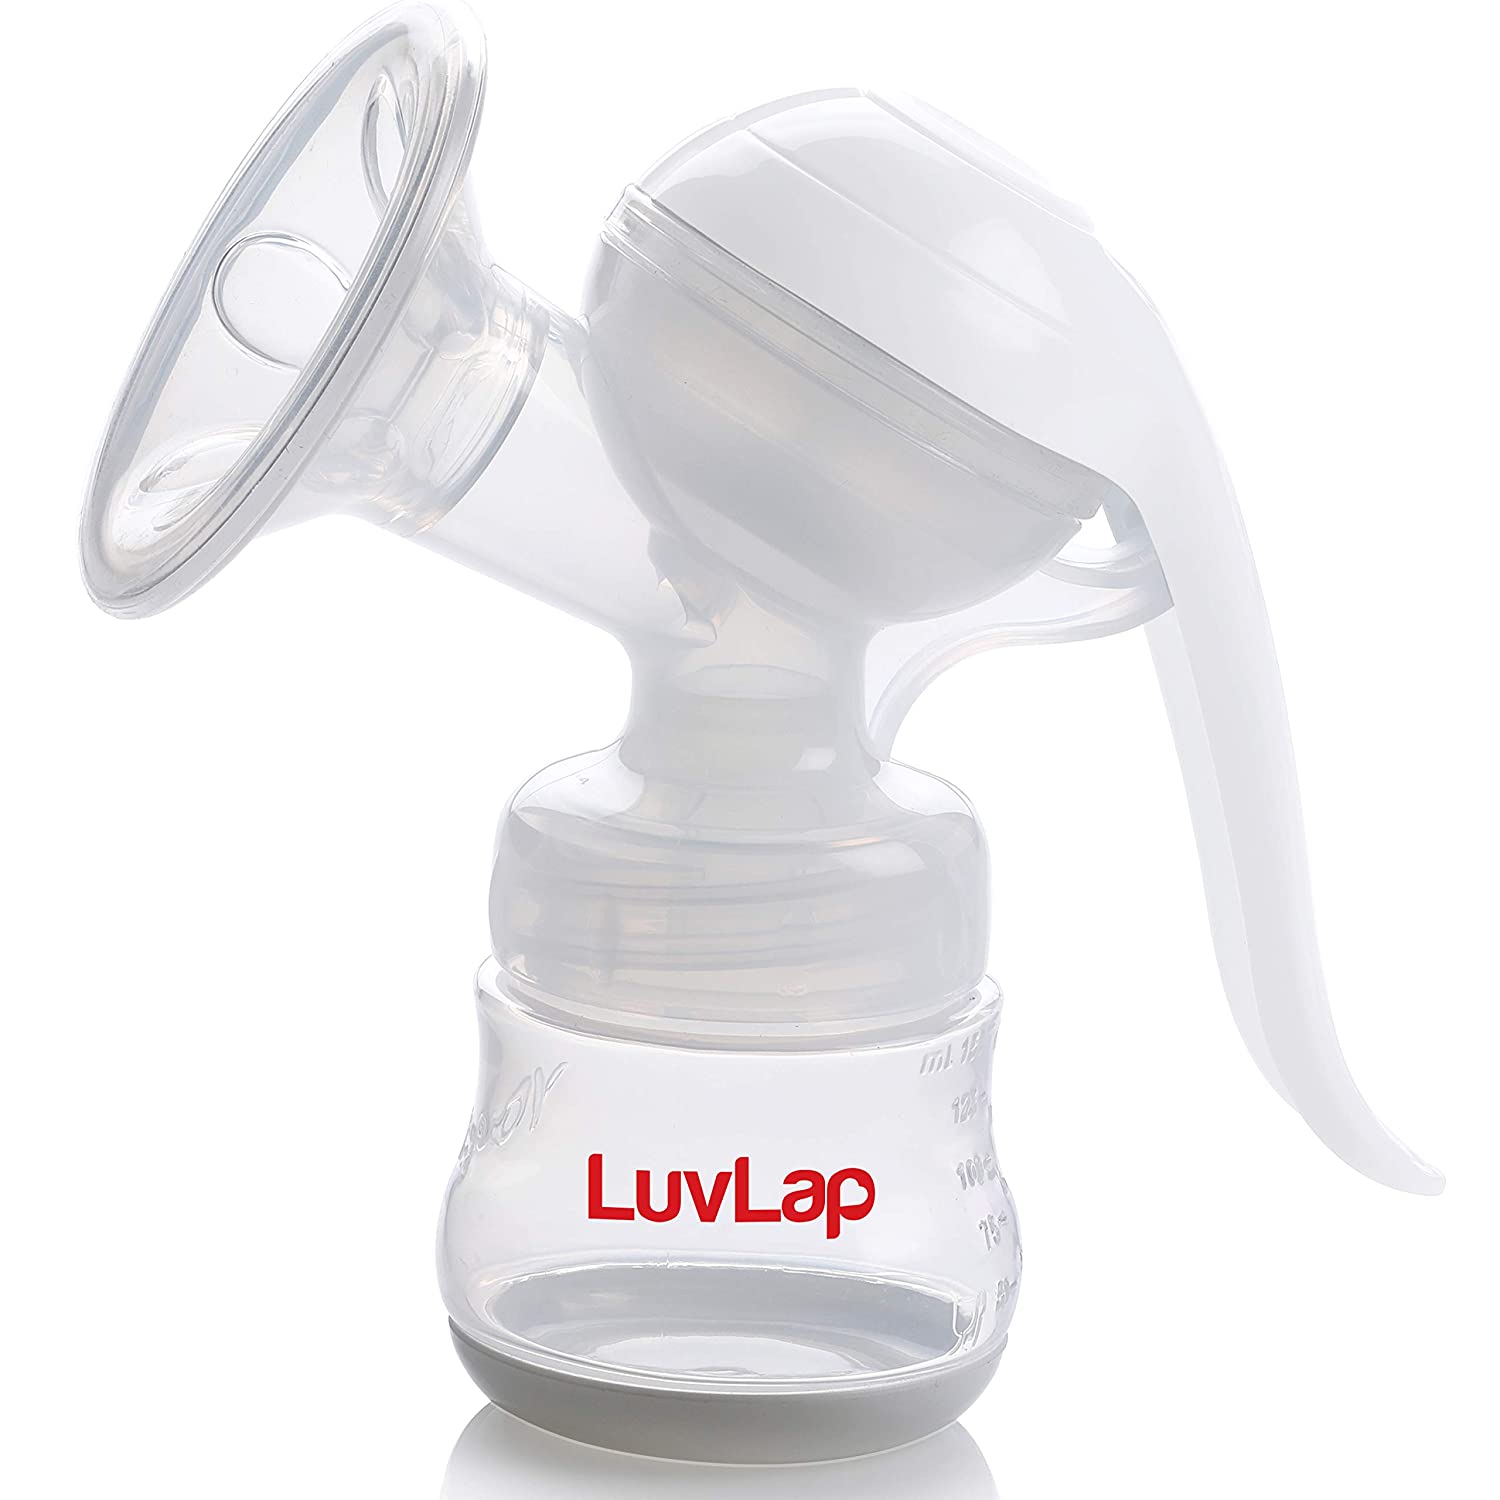 LUVLAP Blossom Manual Breast Pump with 2 Breast Pads Free